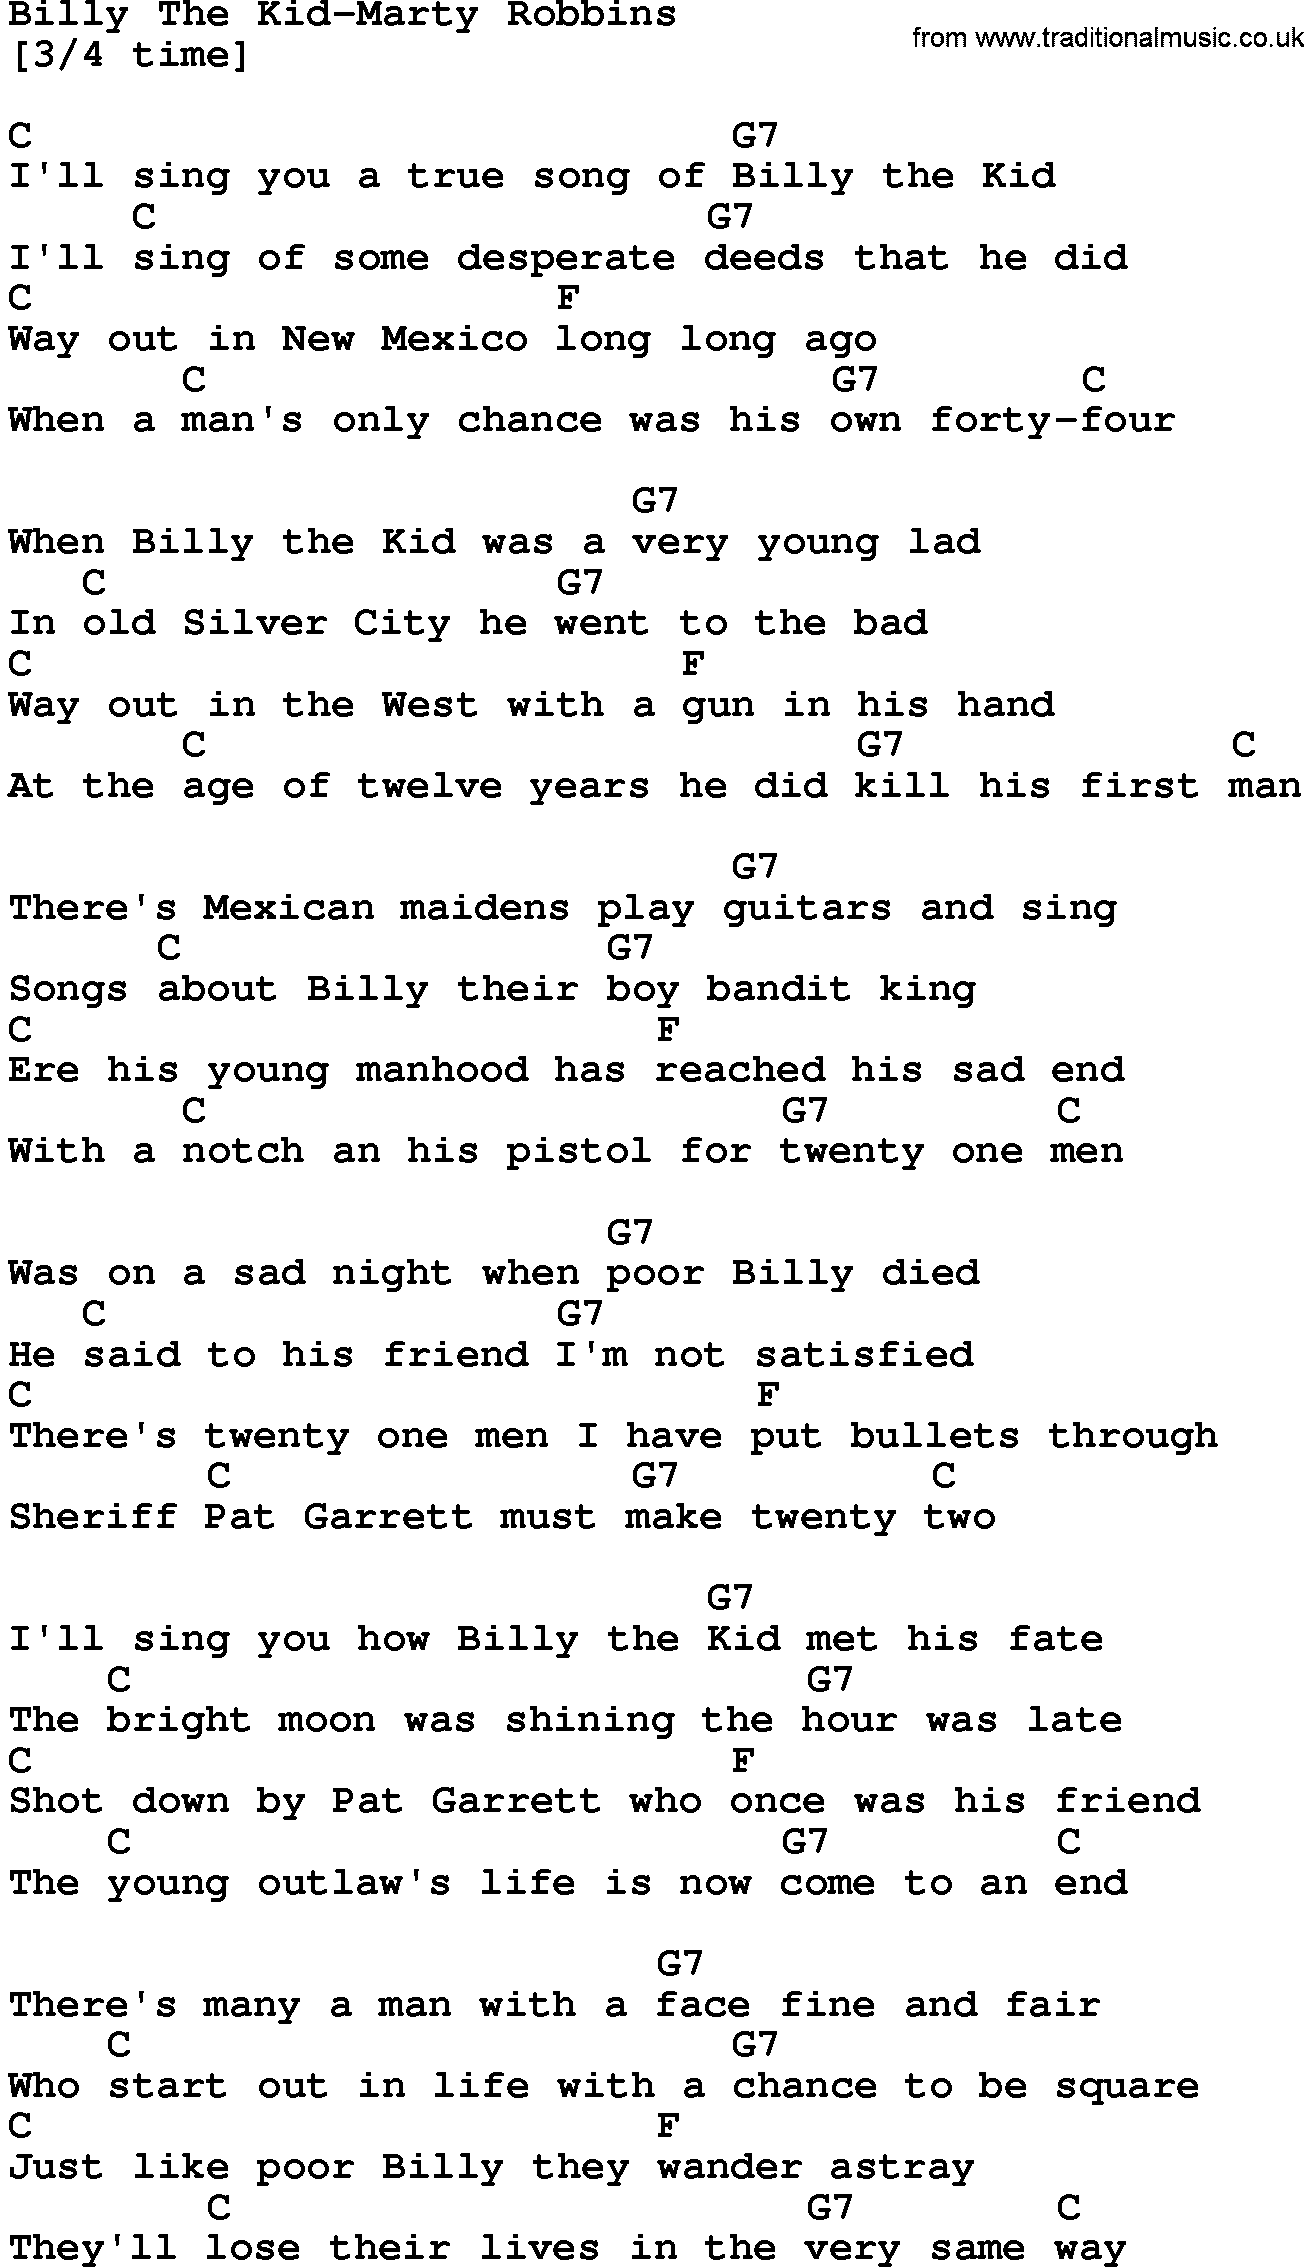 Country music song: Billy The Kid-Marty Robbins lyrics and chords